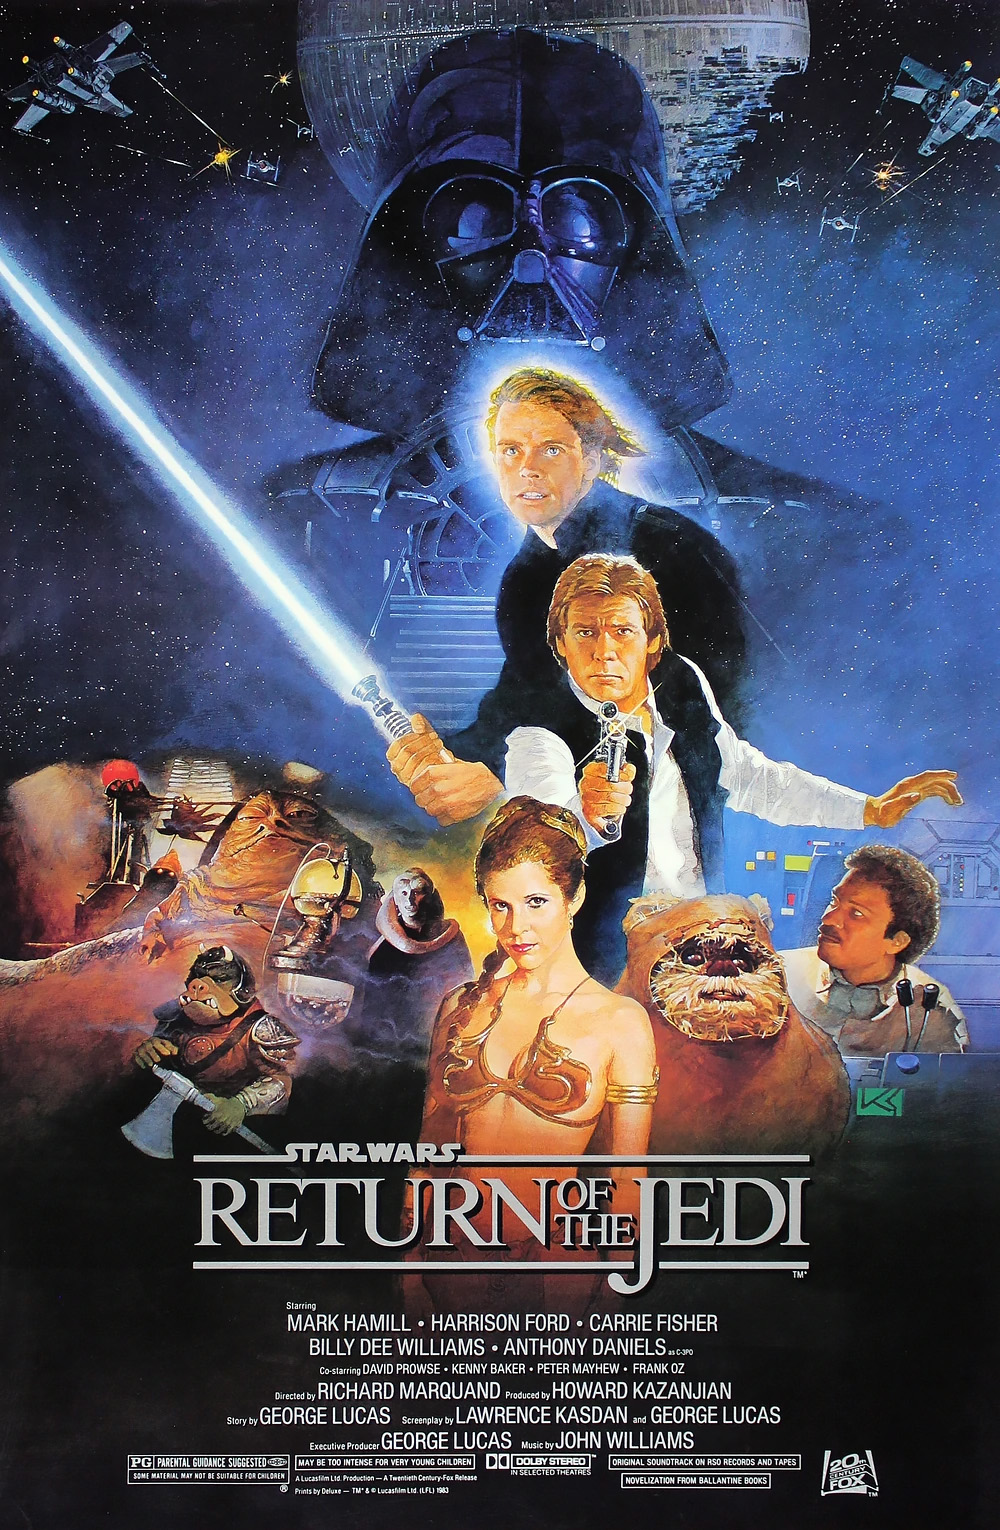 The Return of the Jedi Coming to Theatres SWNZ, Star Wars New Zealand